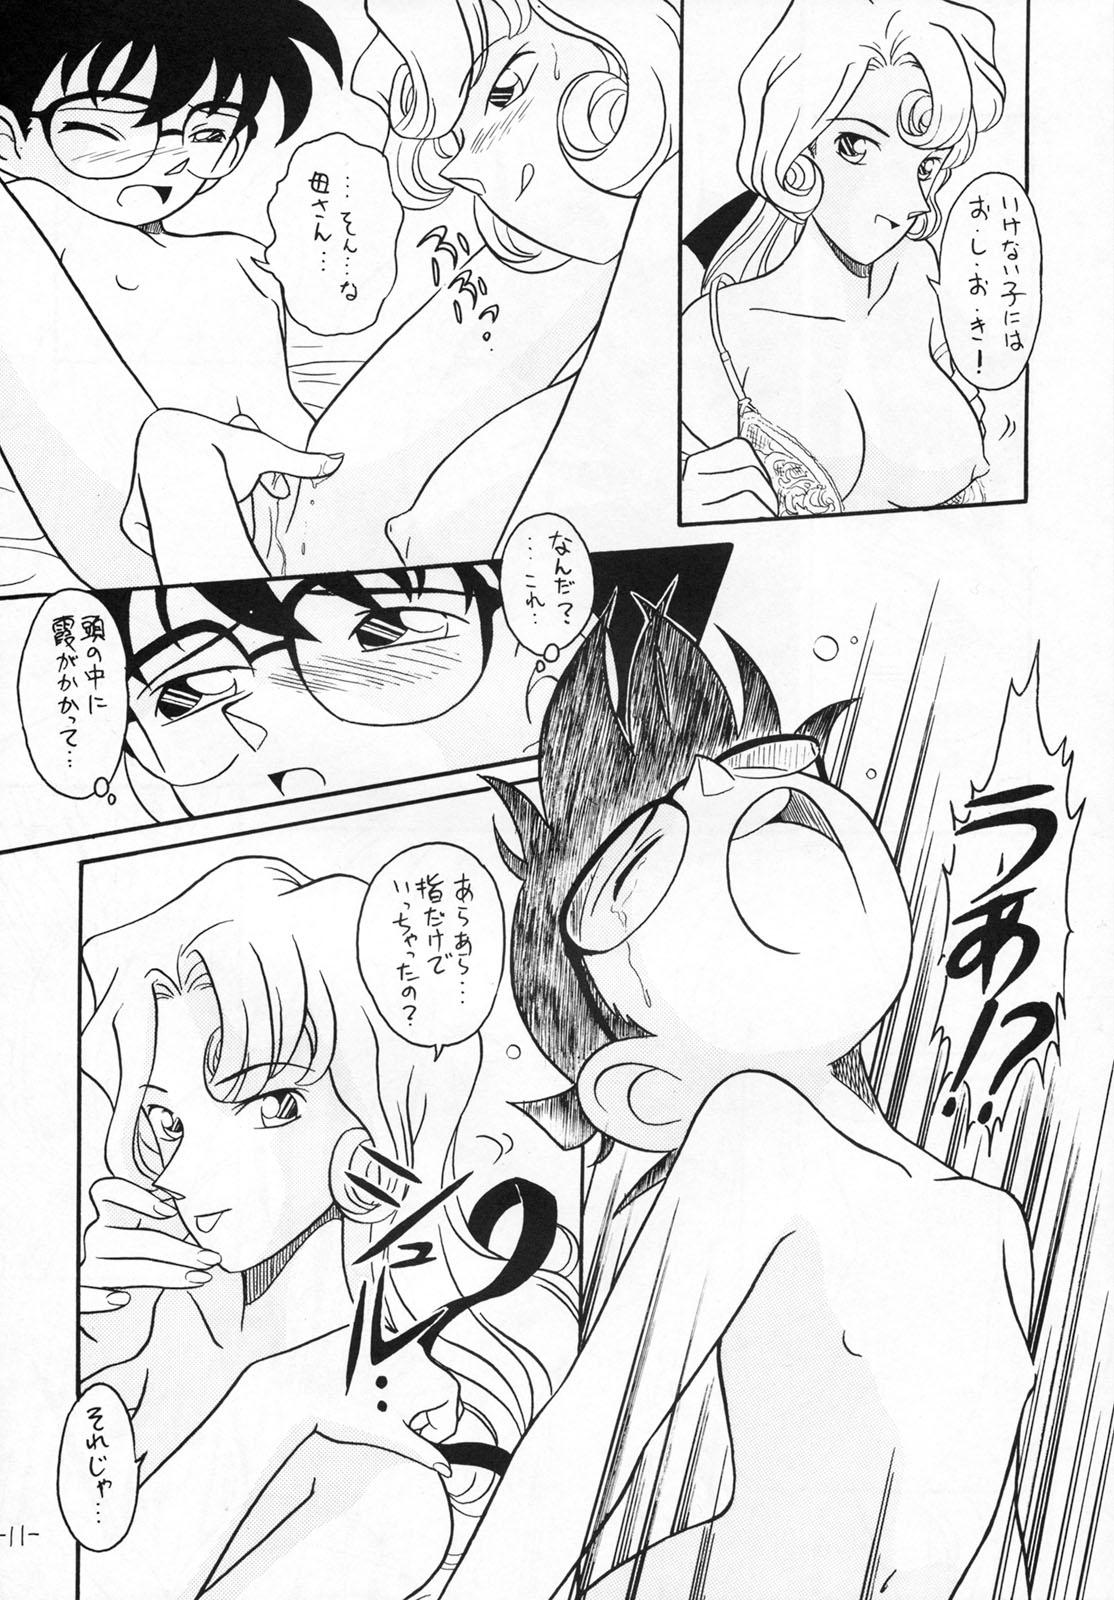 Muscular OUT SIDE 9 - Detective conan Peluda - Page 10